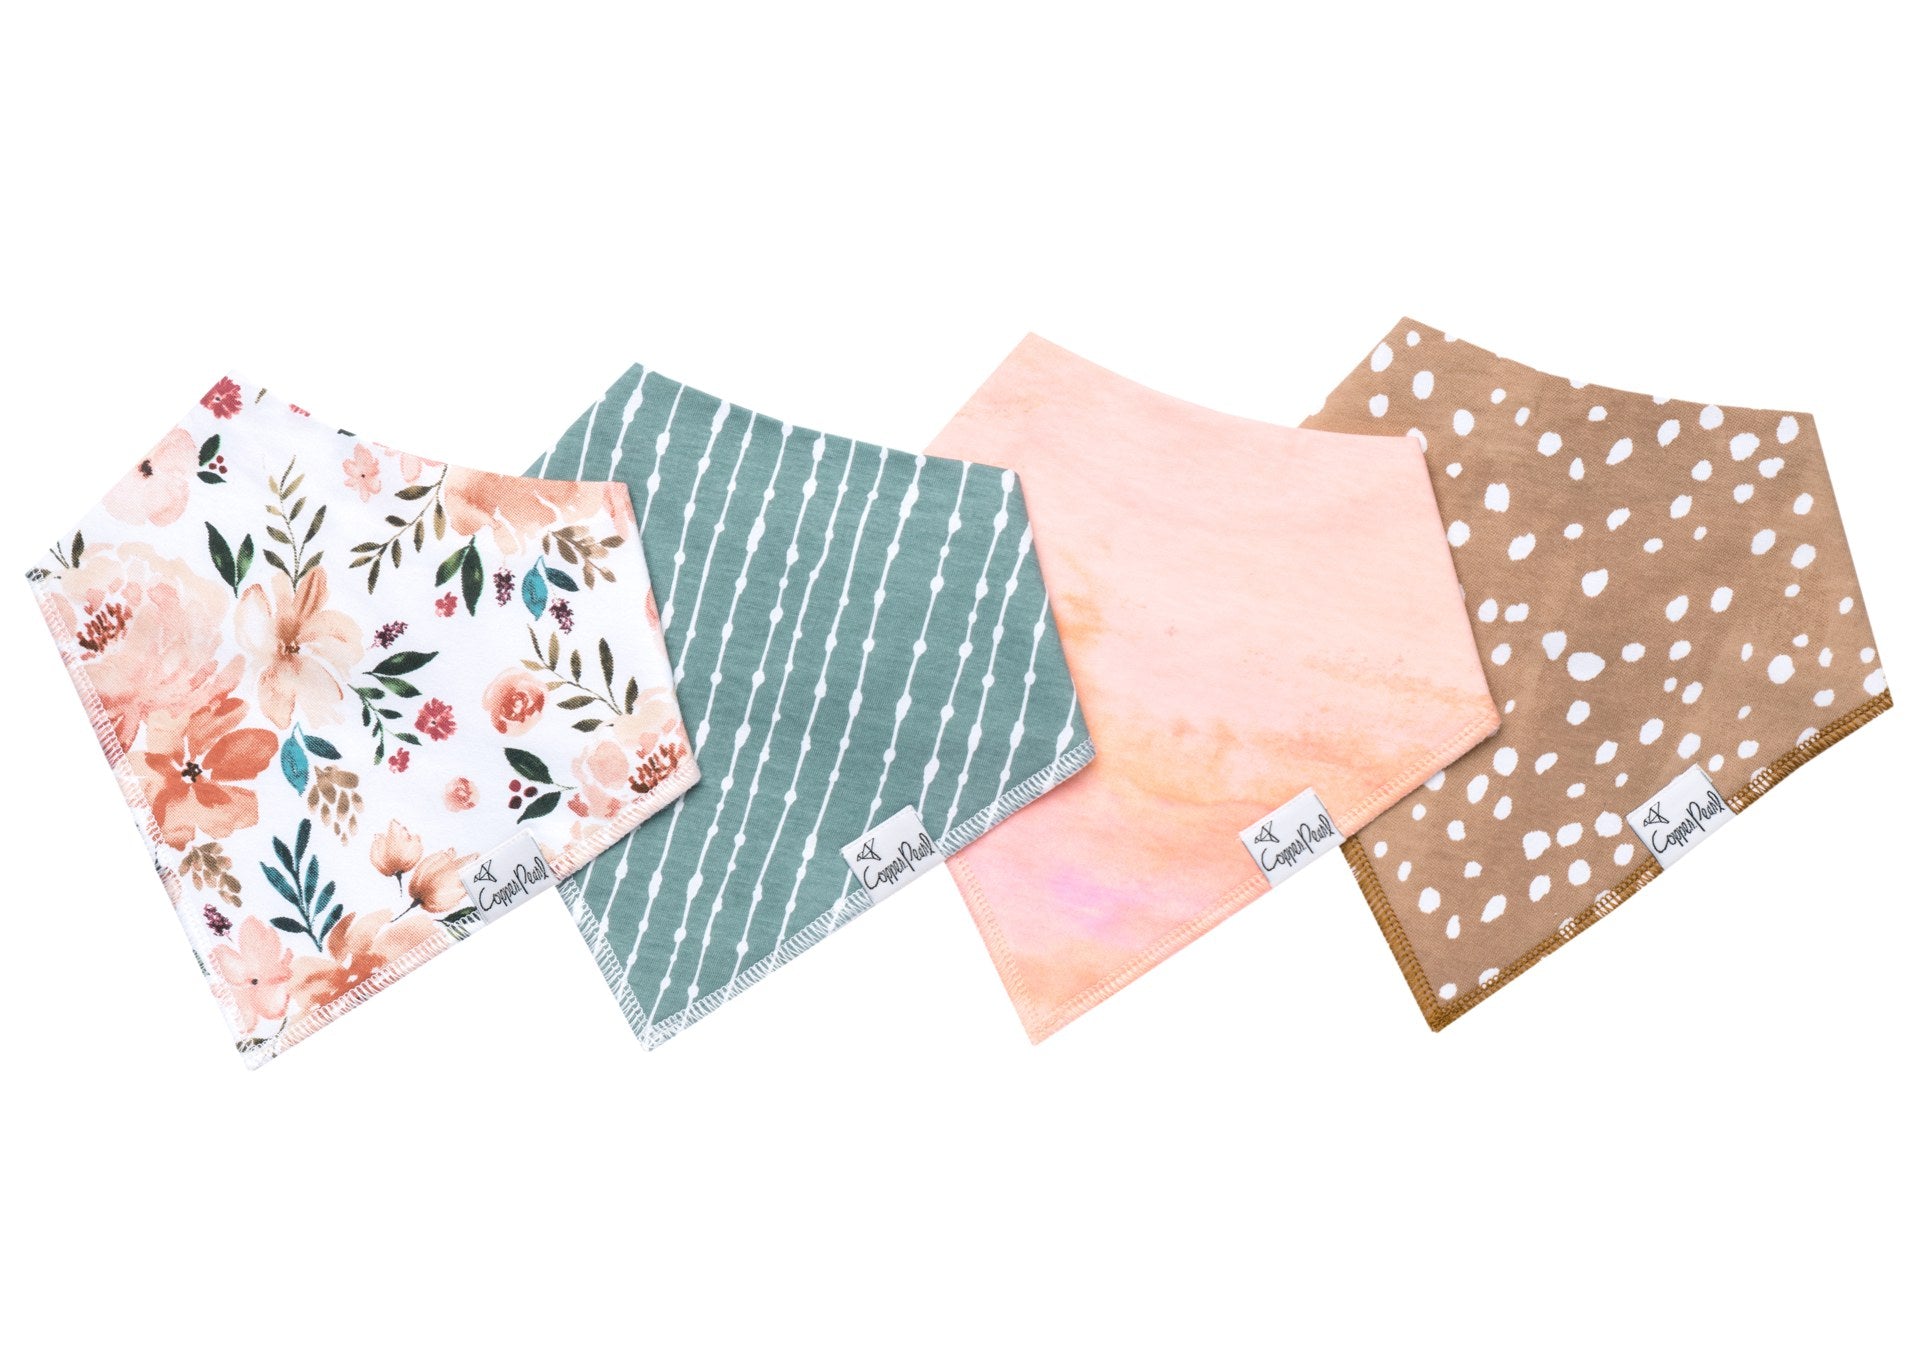 4 designs of bandana bib in set (left to right: floral, blue with white stripes, pink, brown with white dots)